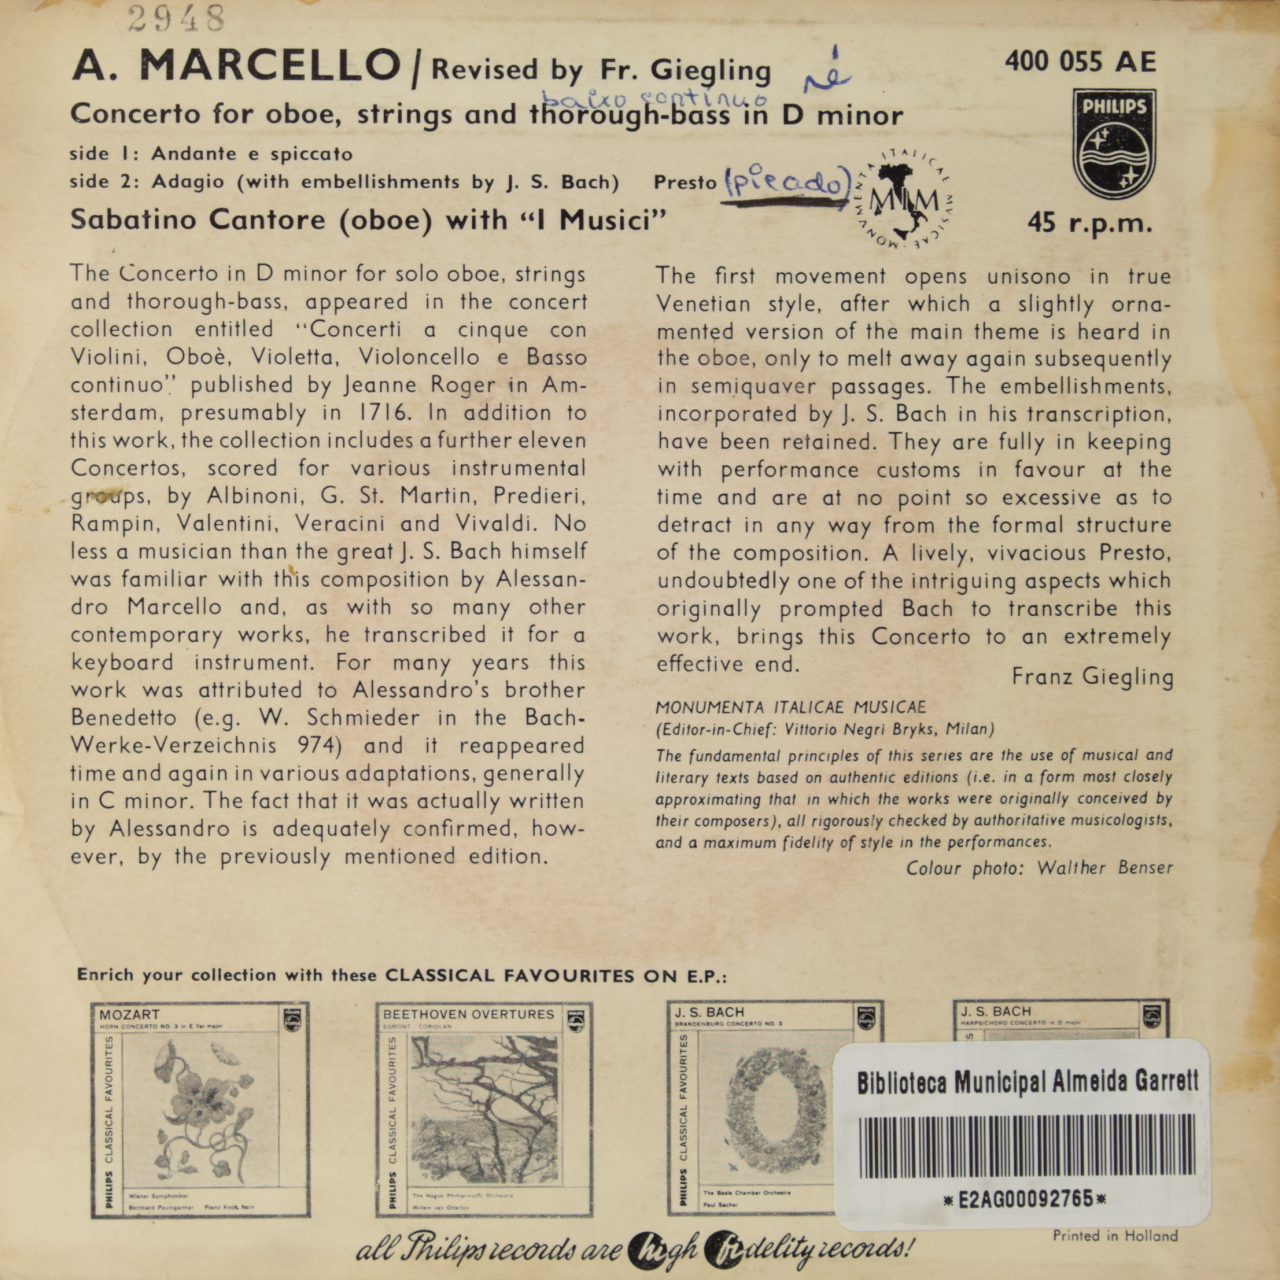 Marcello: Concerto for oboe, strings and thorough-bass